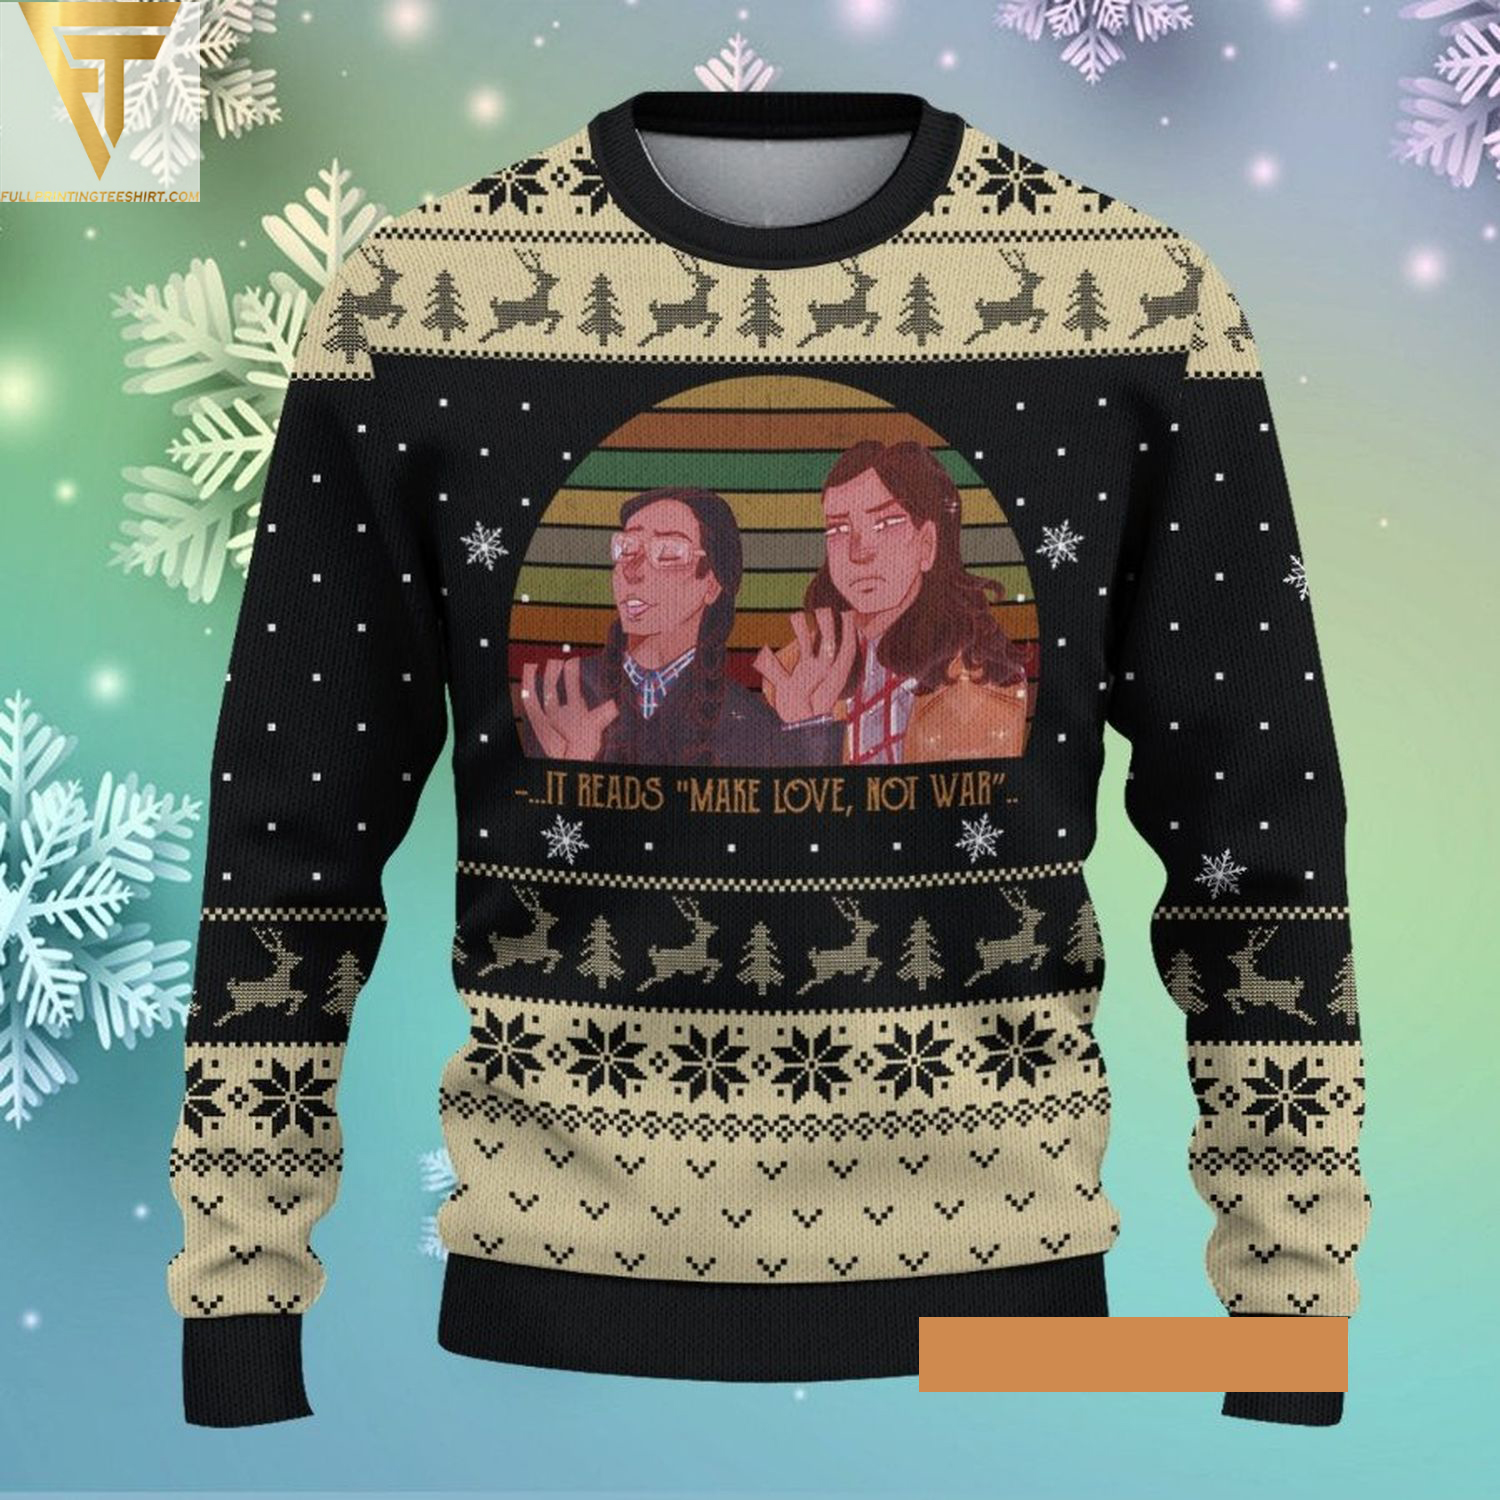 Native american make love not war ugly christmas sweater - Copy (2)